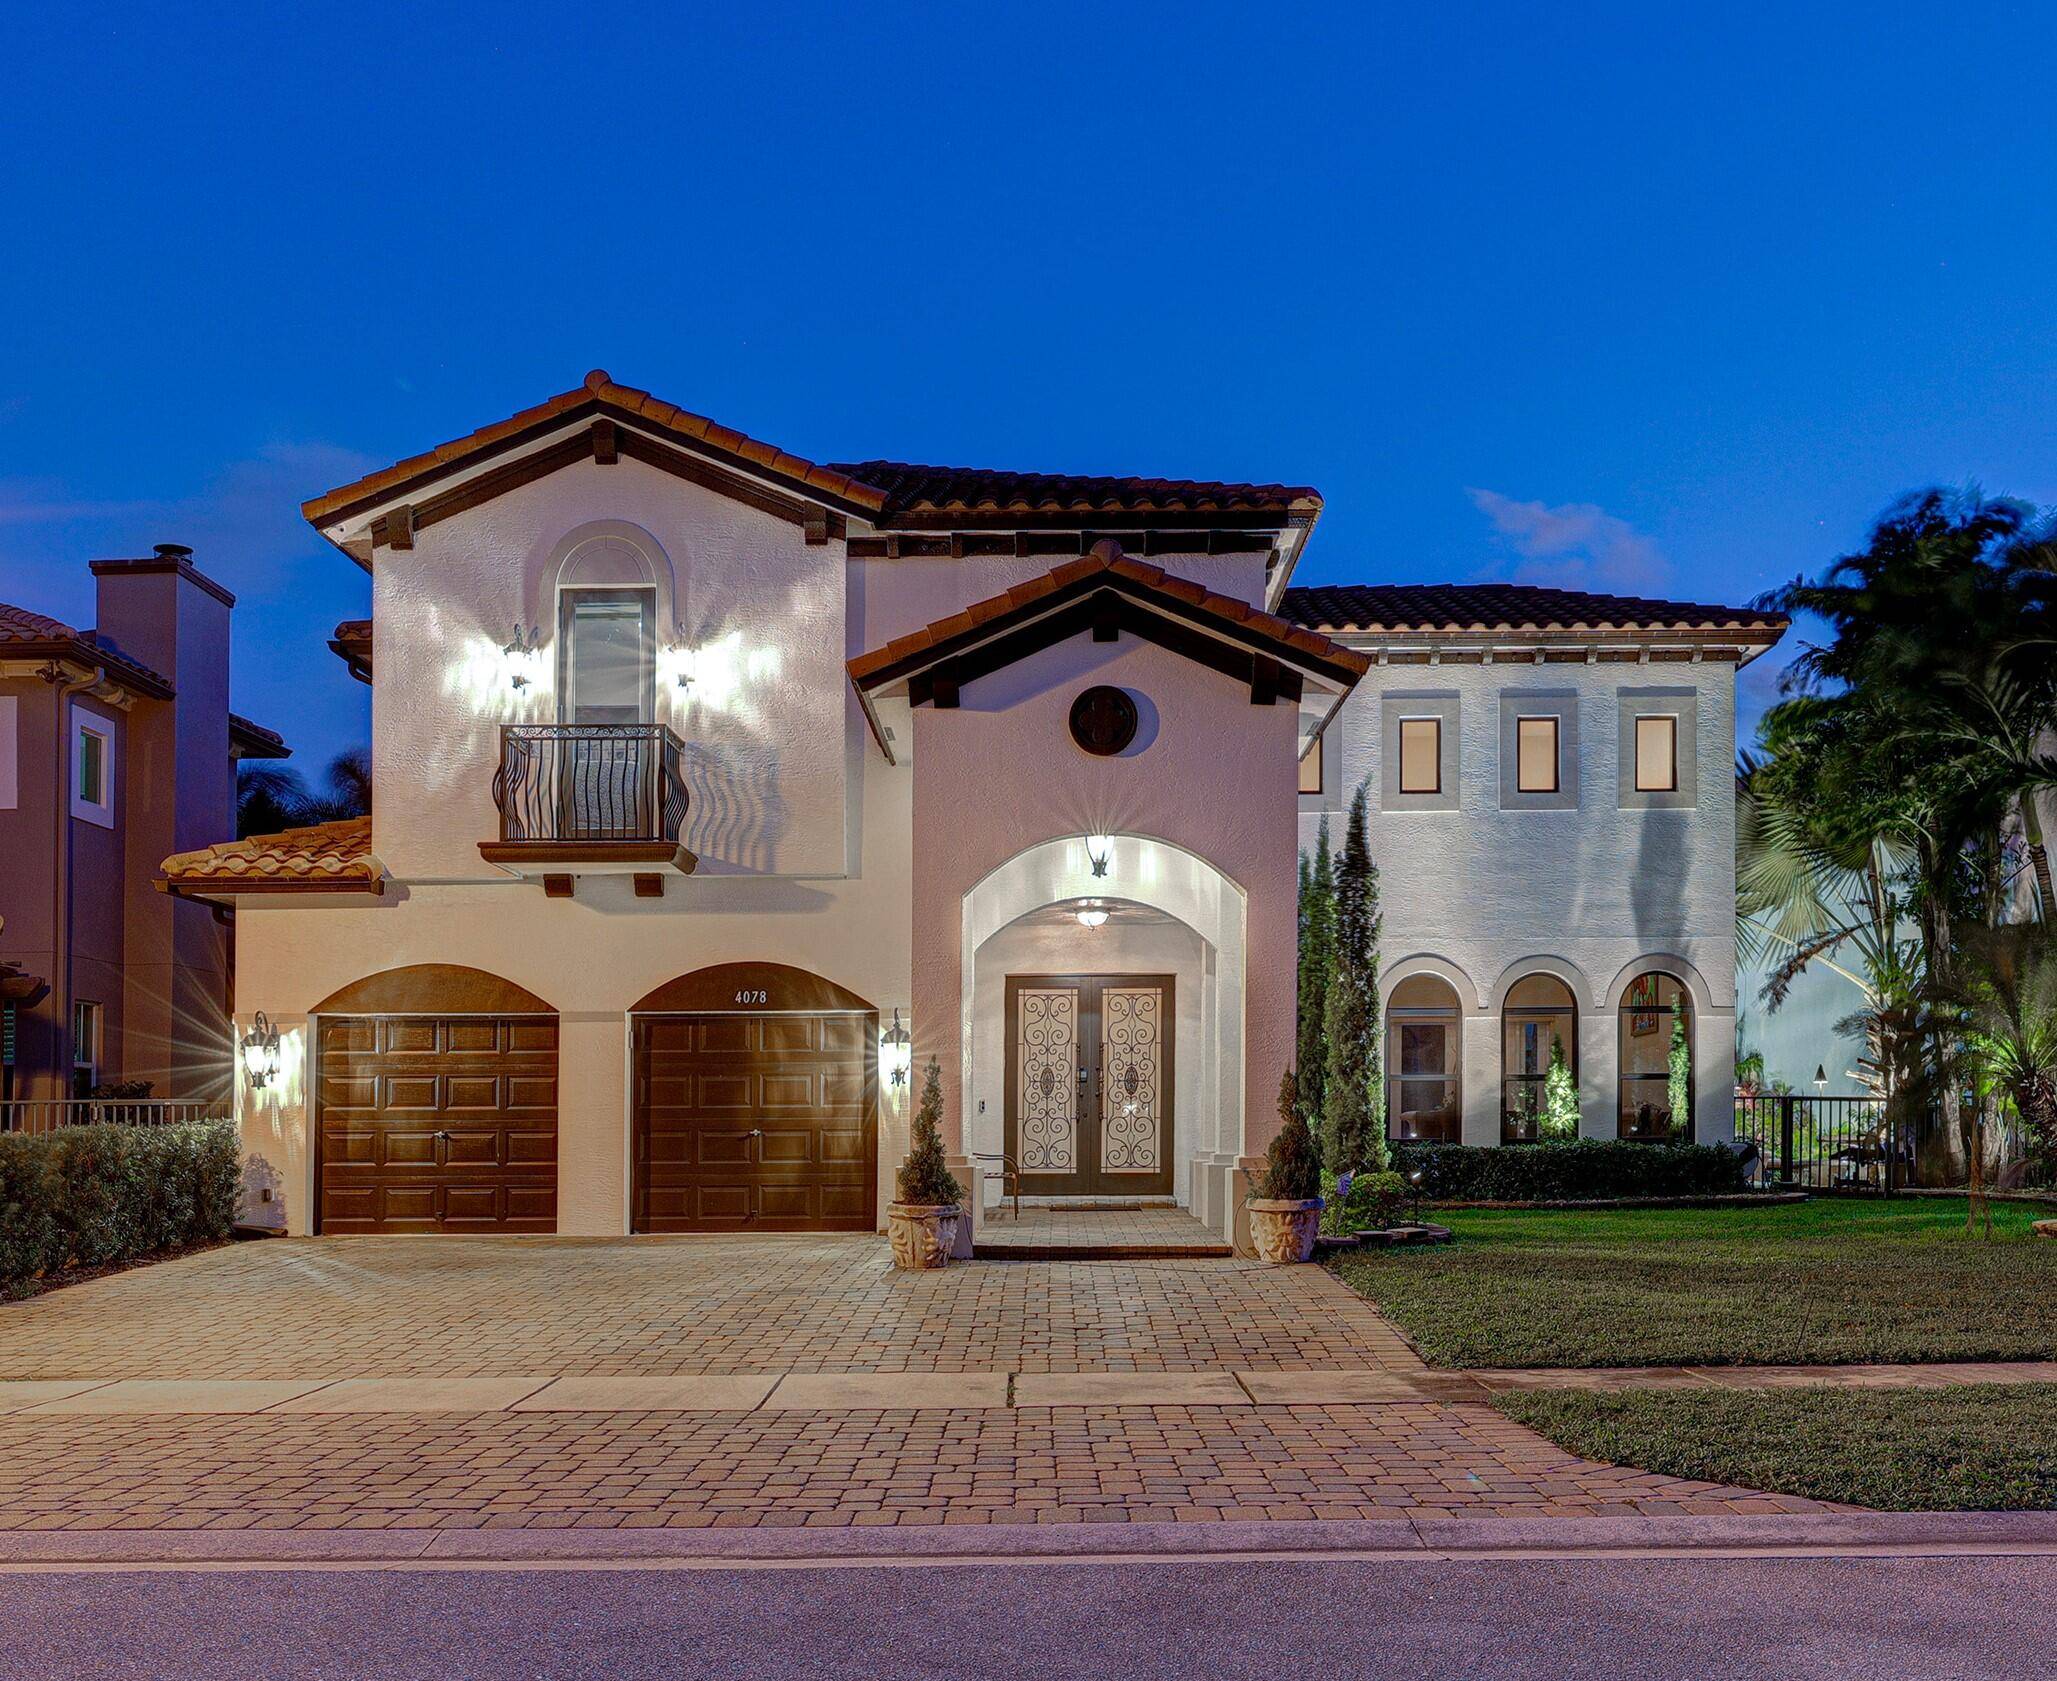 Live the Florida Lifestyle in this beautiful 4 bedroom, 4 bath pool home.